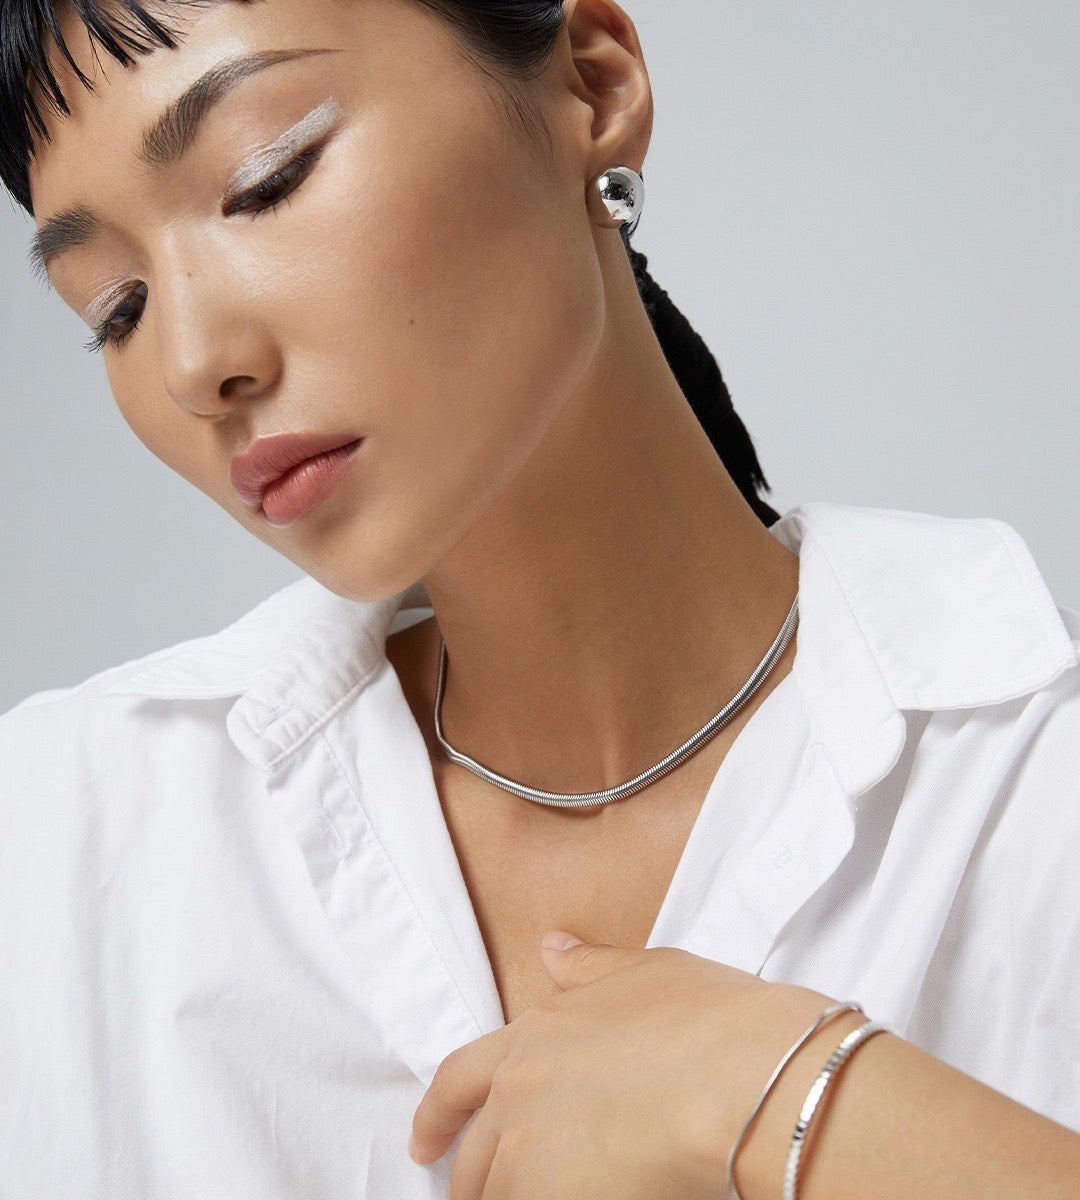 Necklace Embodying Durability and Timeless Grace- S925 Sterling Silver with 18K Gold Vermeil - Embrace your Inner Resilience - Crafted with care and designed to last - The perfect accessory for every confident and empowered woman